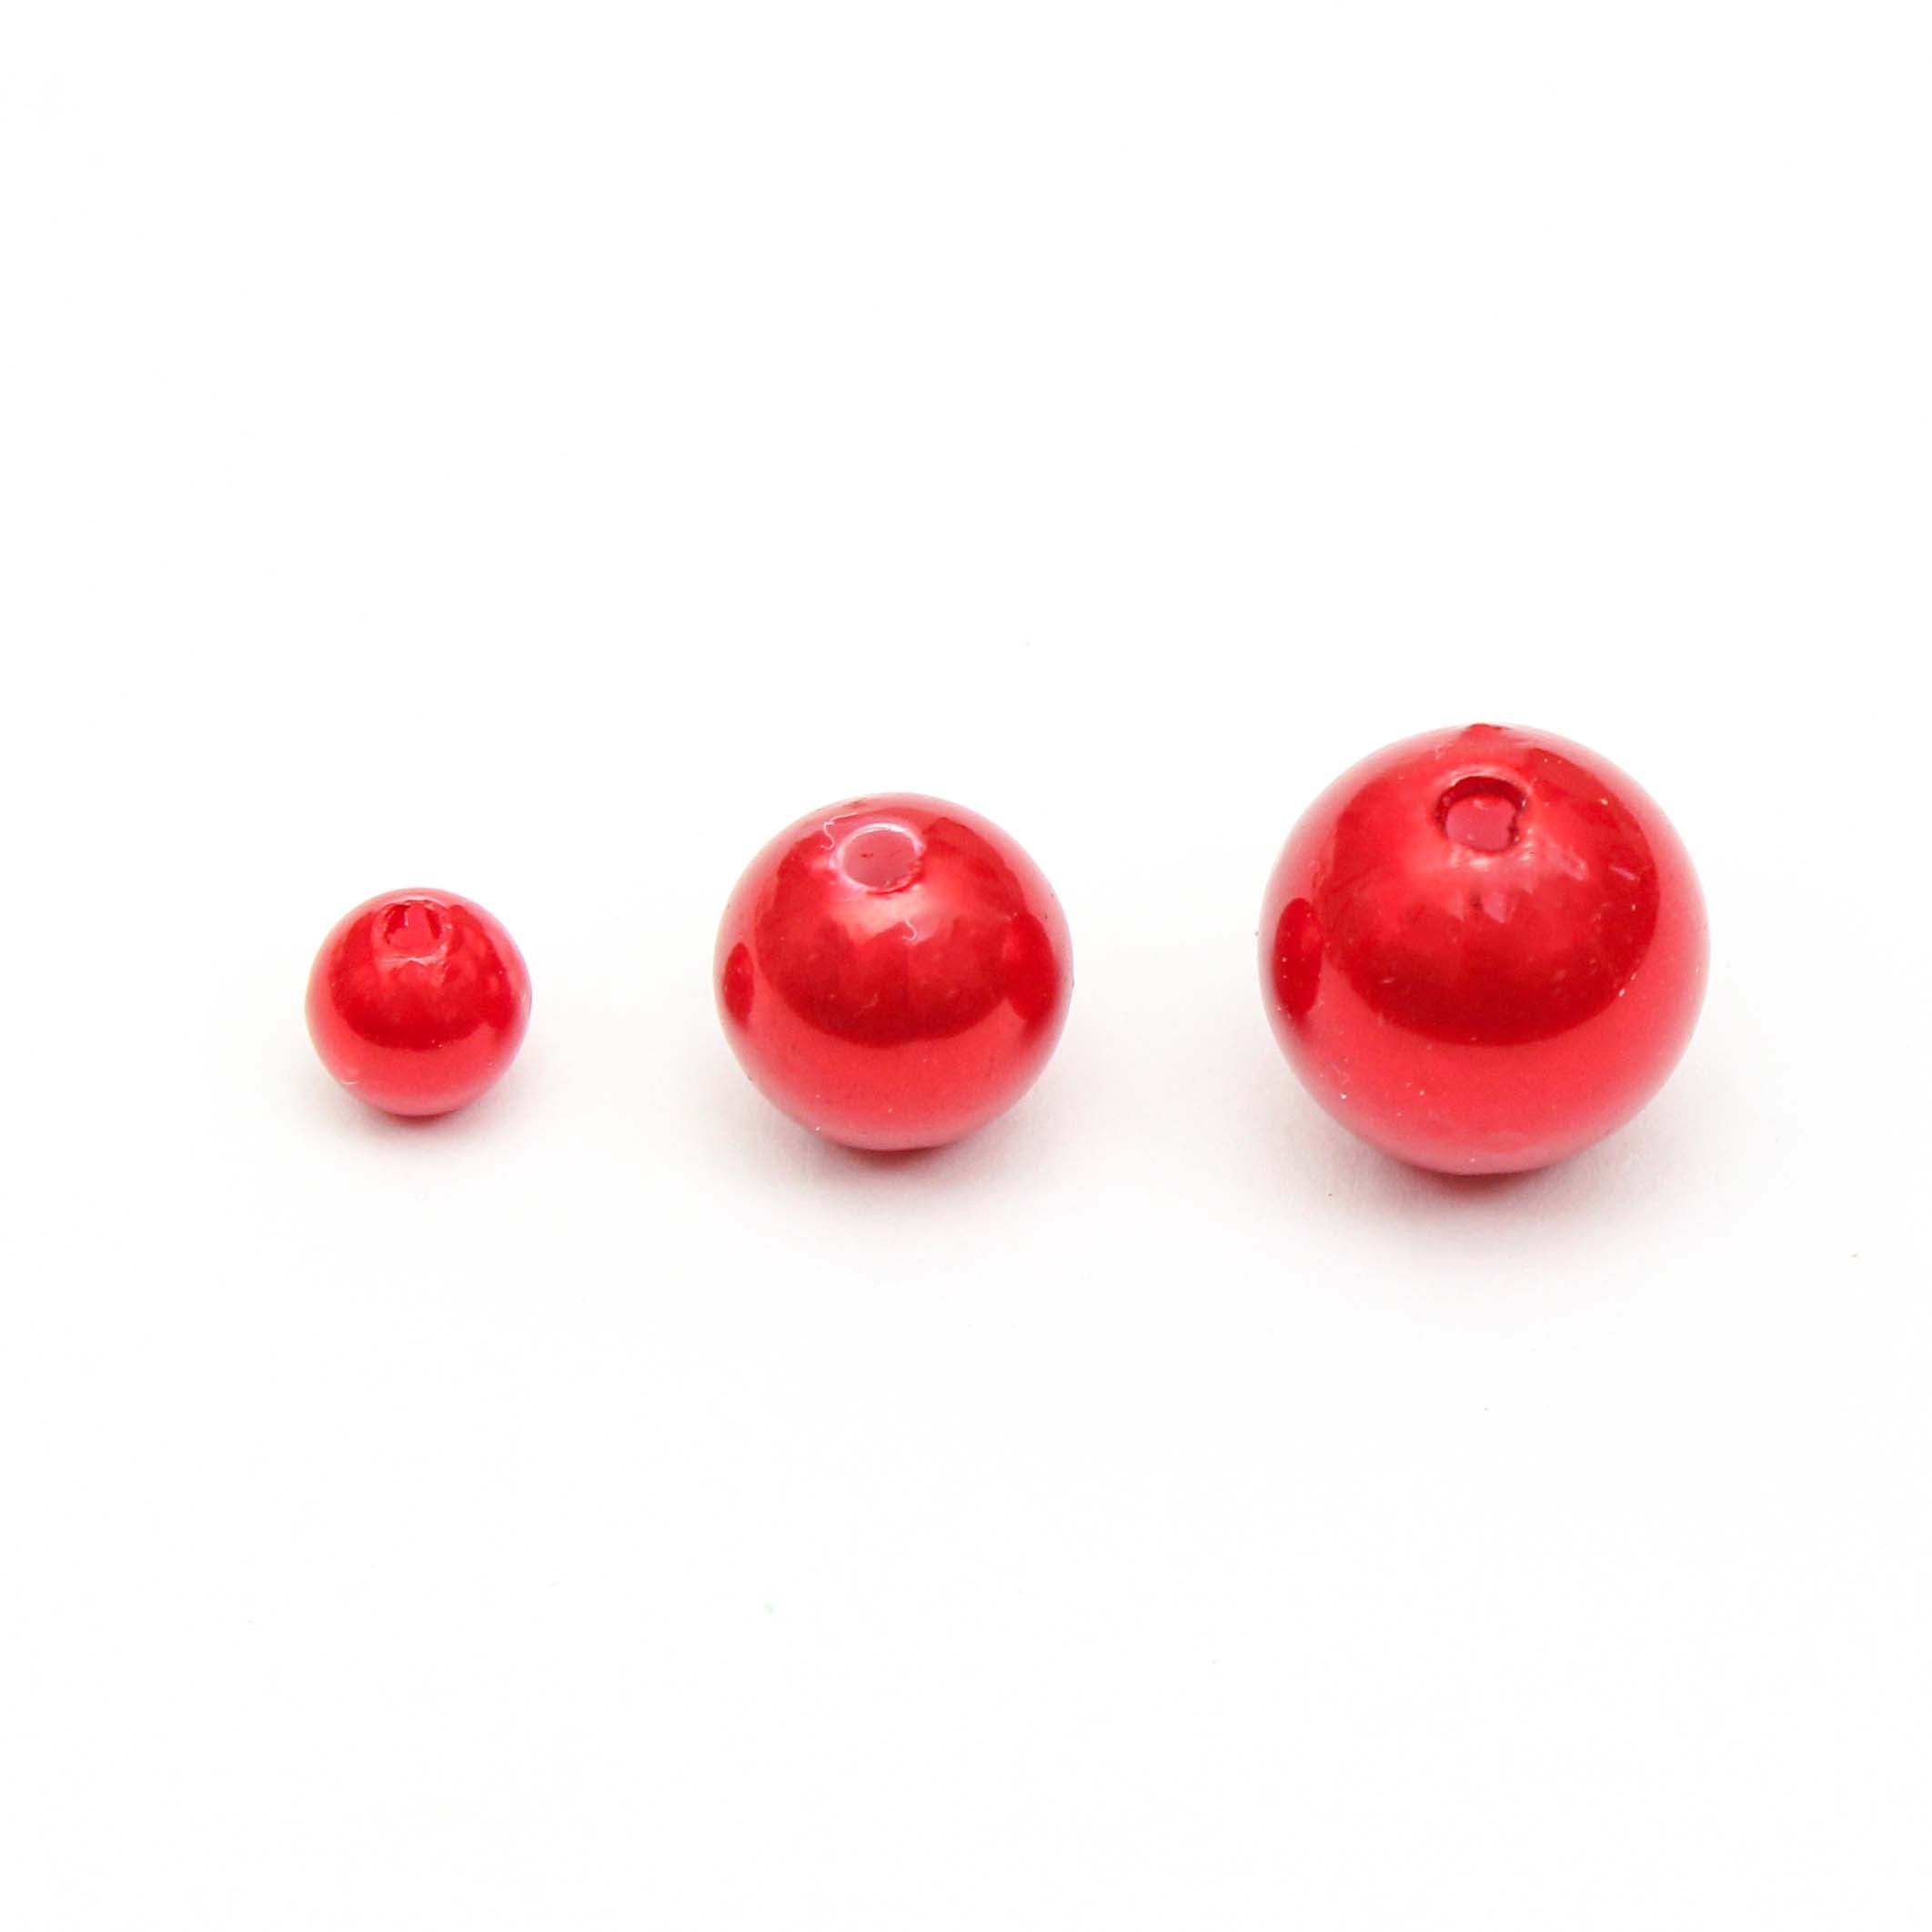 Christmas Elements - Red Pearl Beads, Assorted Size, 6mm,10mm,12mm, 30g